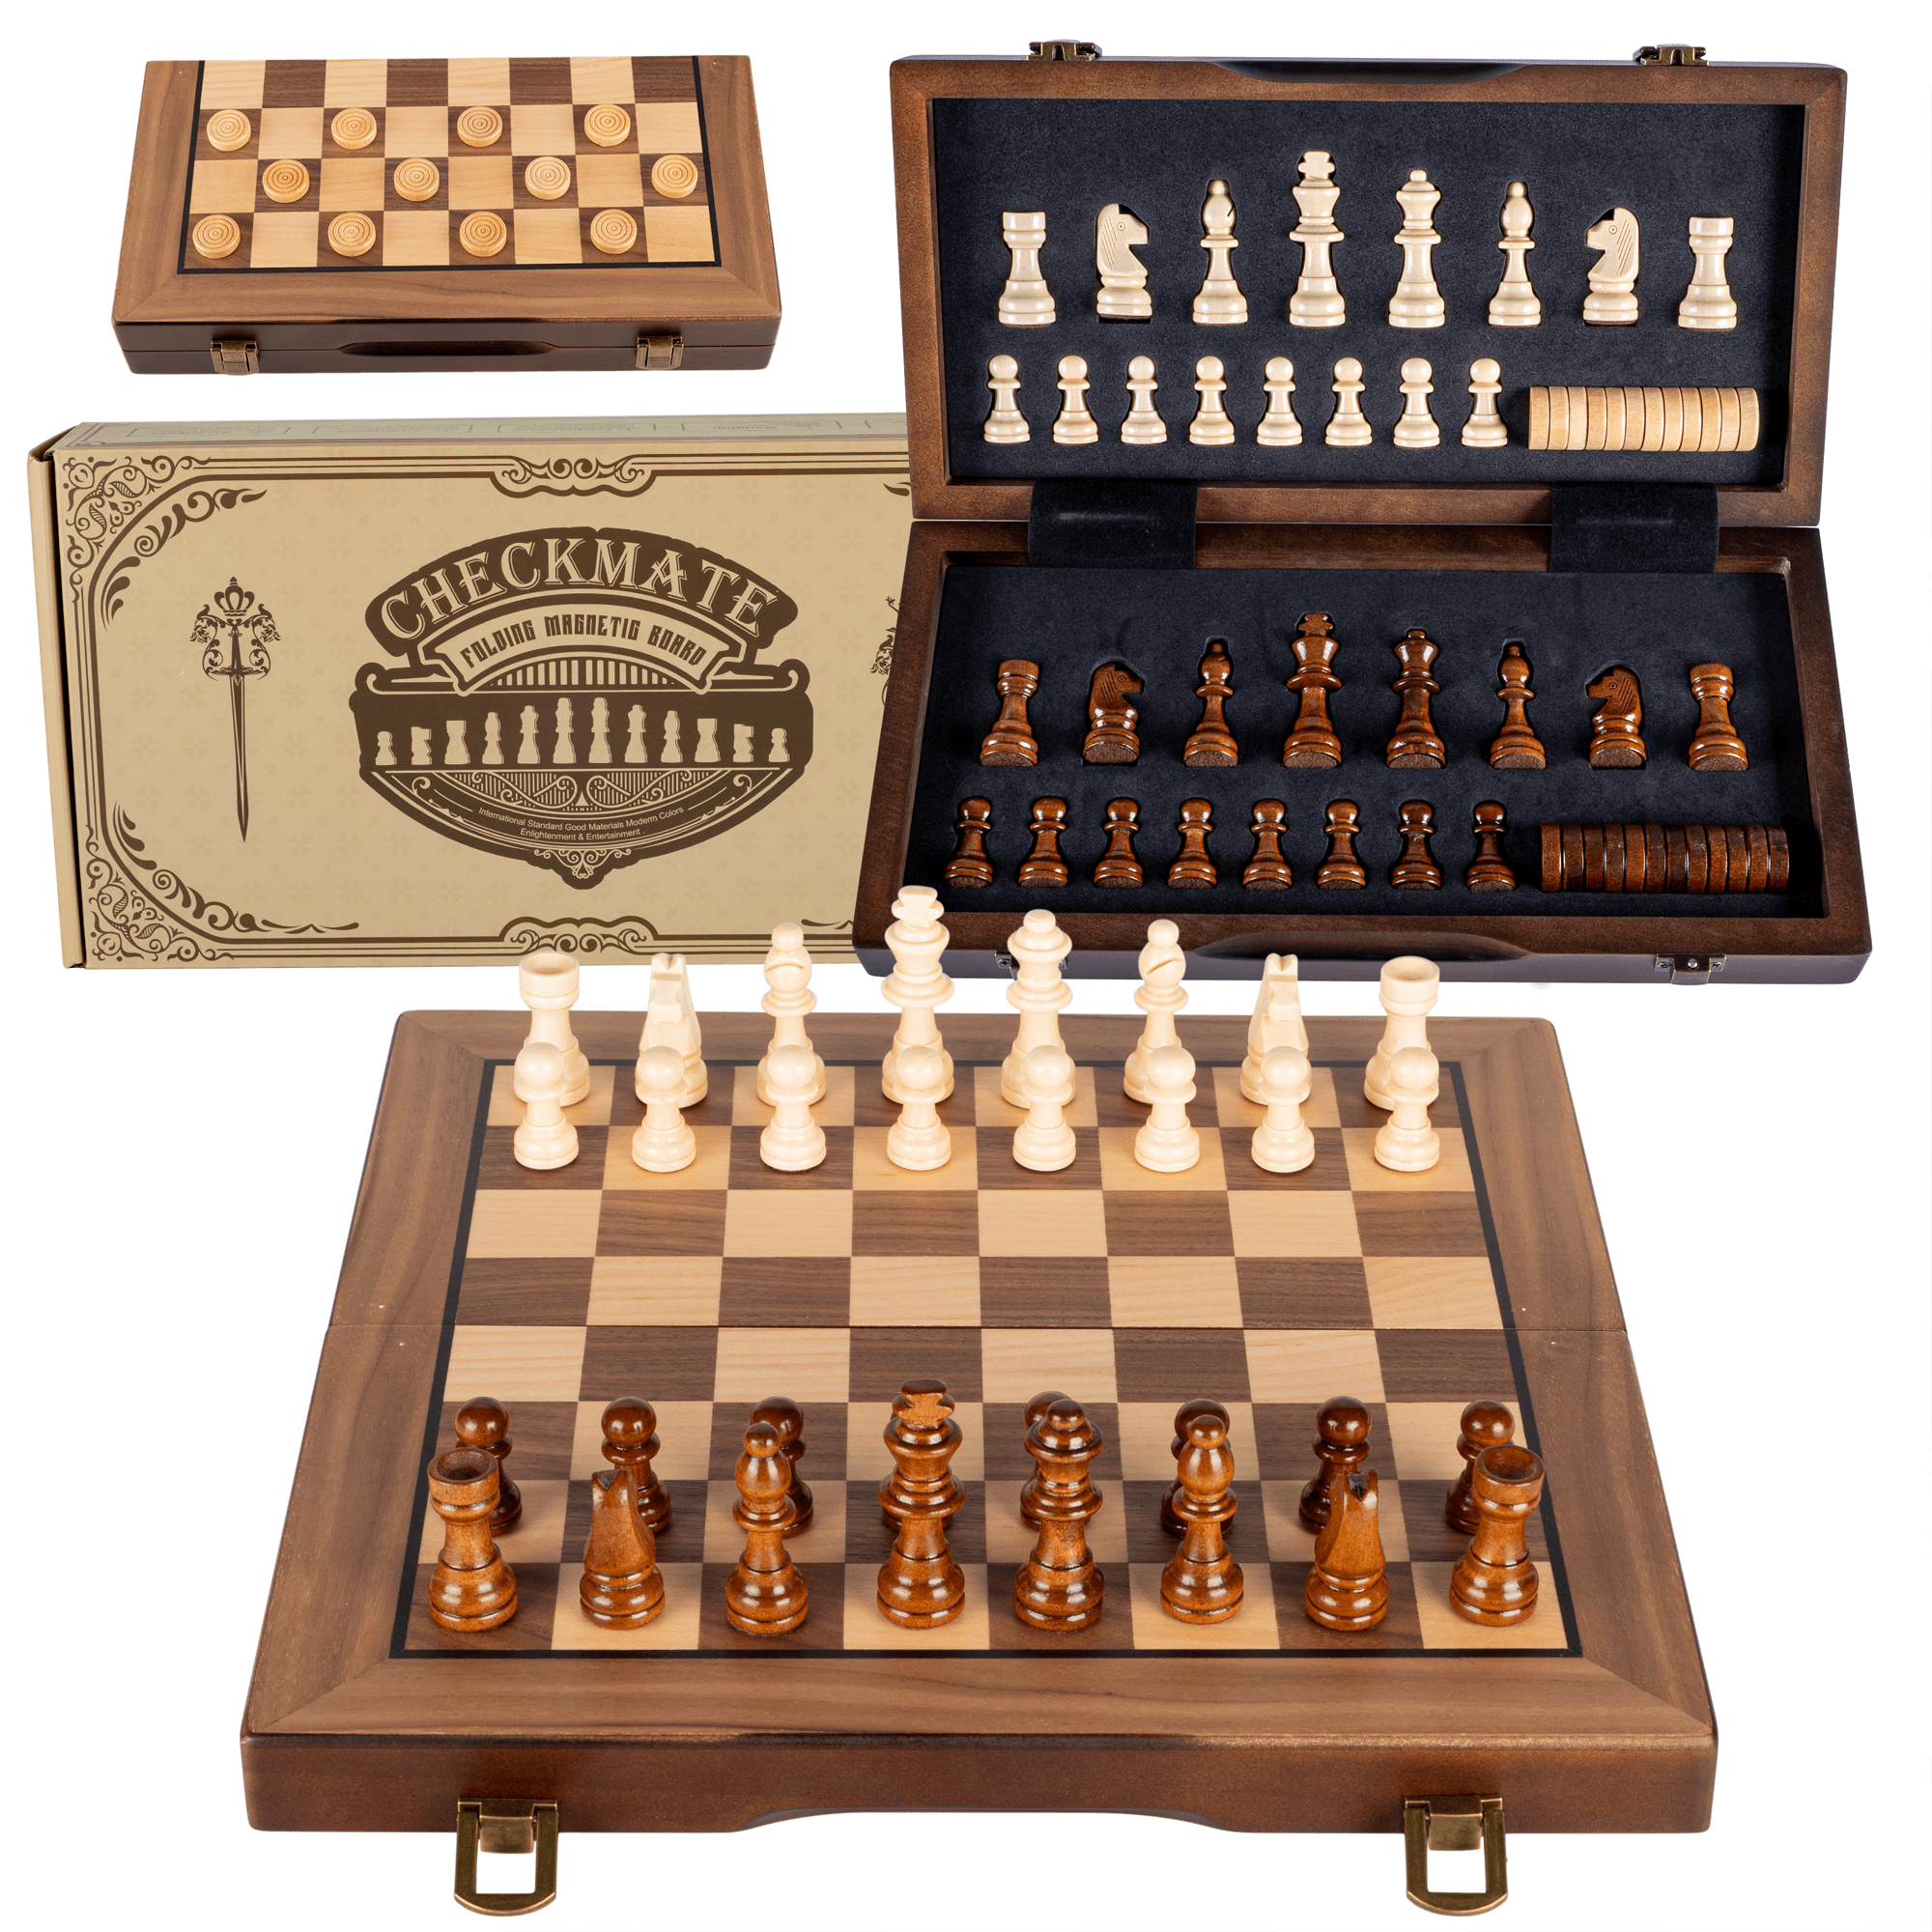 Wooden Chess Game, Foldable Wooden Chess Board, 2 in 1 Chess and Lady Game, Wooden Chess Game for Adults, Children, Family, 30 x 30 cm